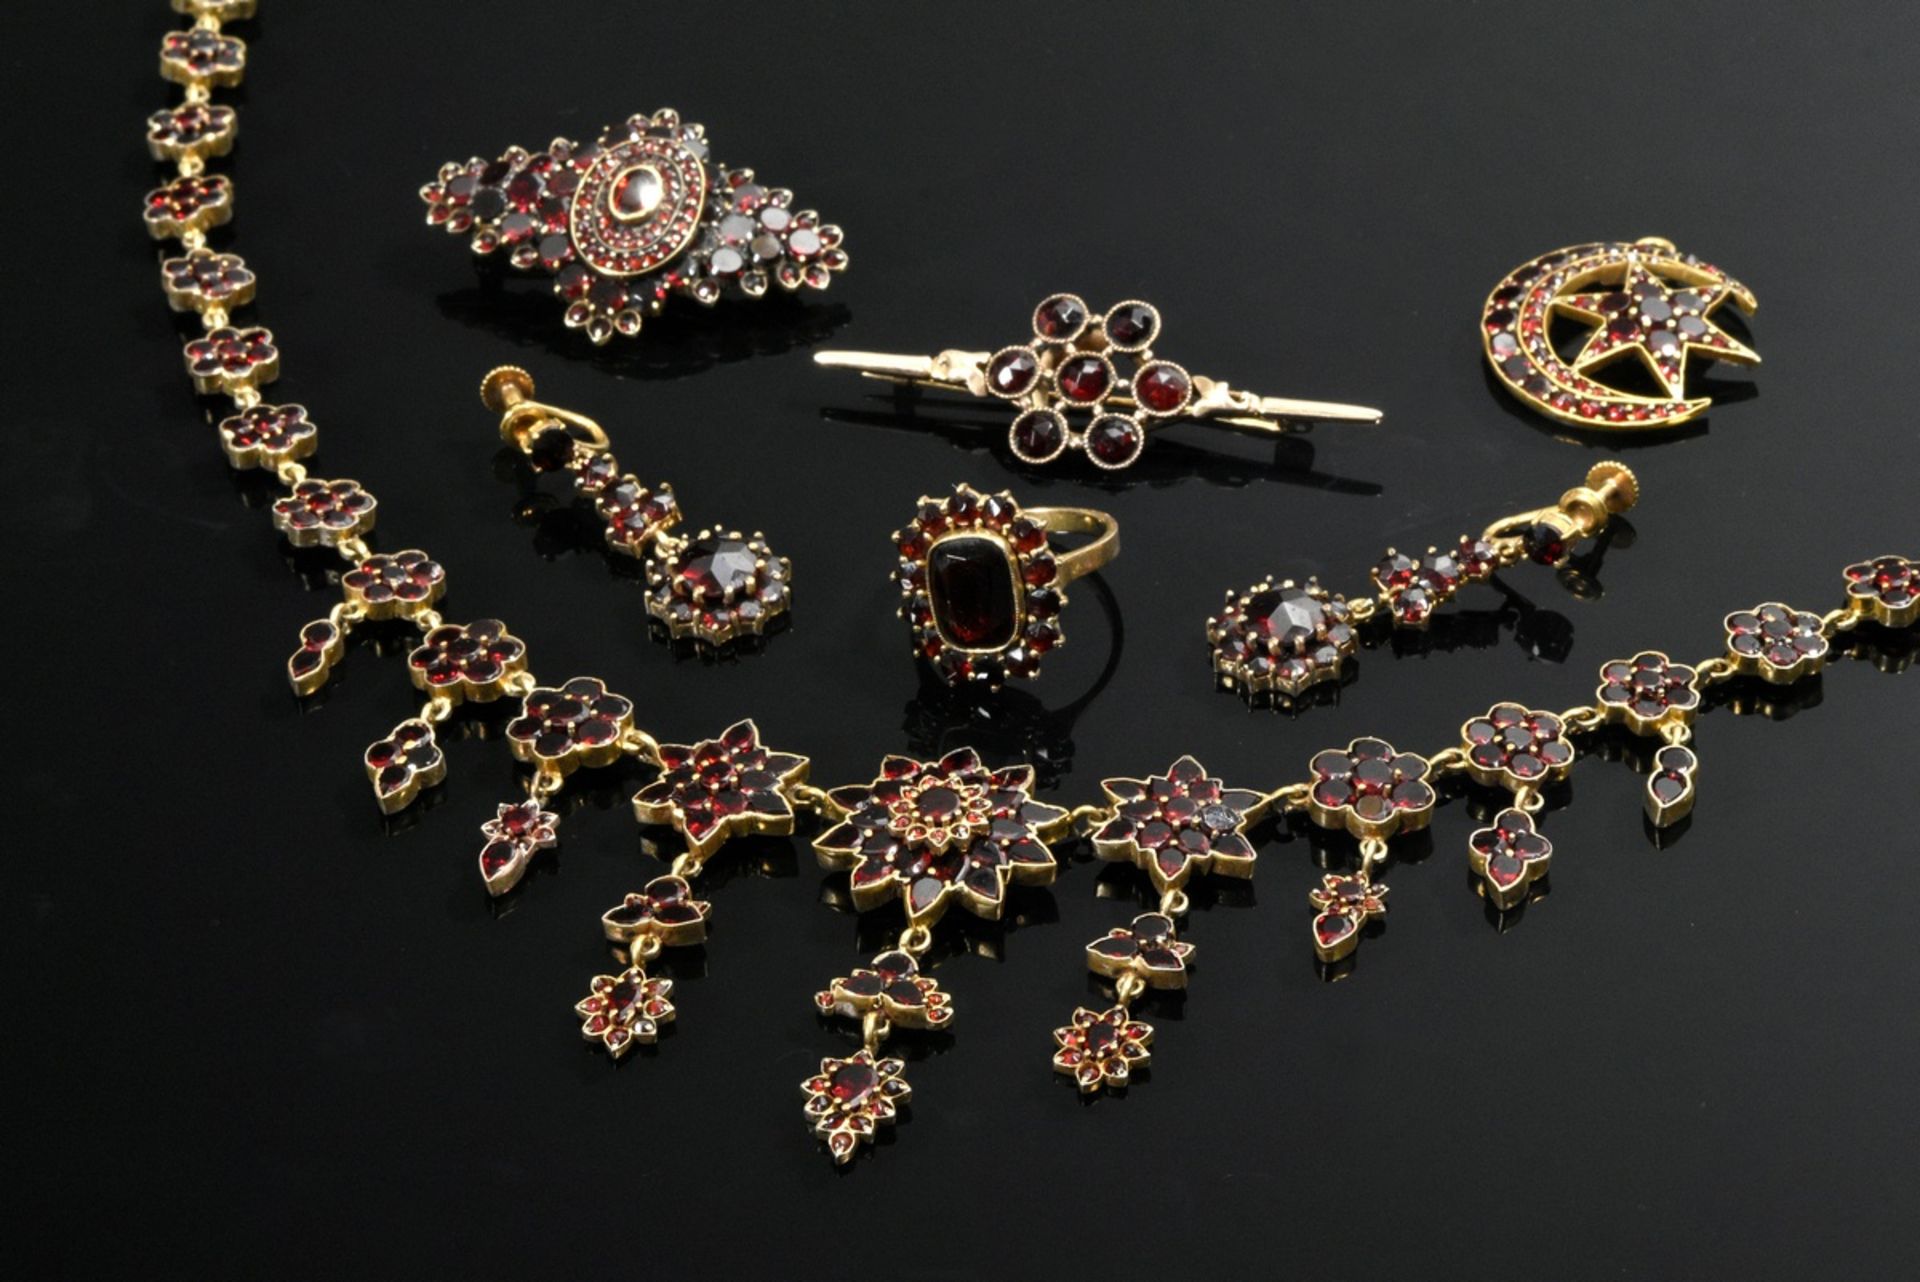 7 Various pieces of garnet jewelry: tombac necklace (l. 47cm), needle (l. 4.3cm), pair of earrings 